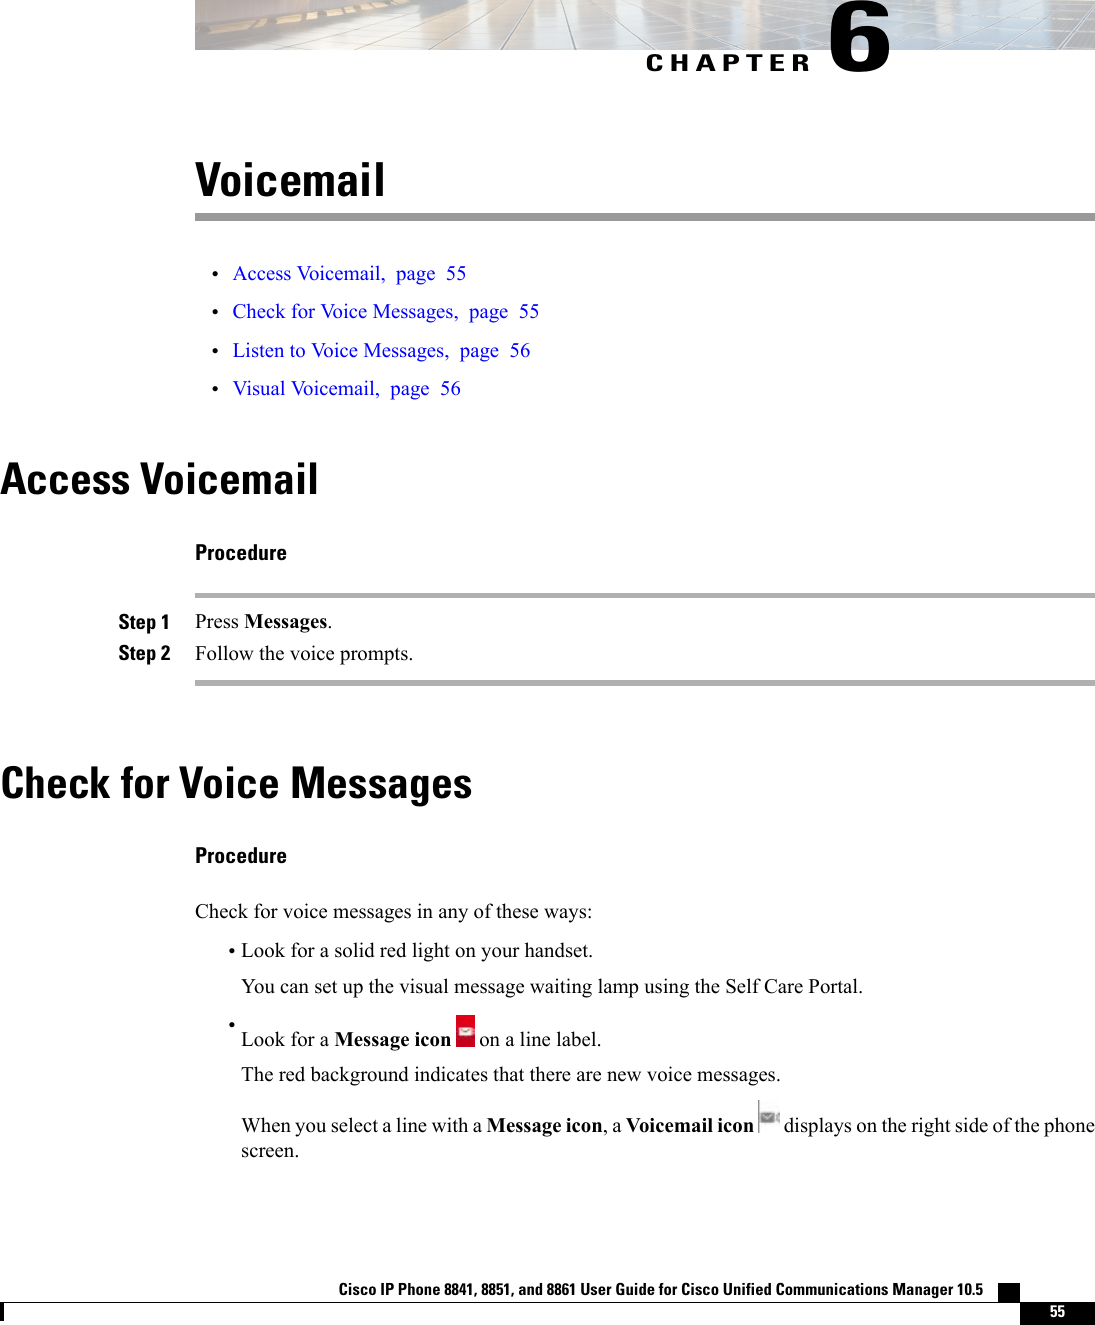 CHAPTER 6Voicemail•Access Voicemail, page 55•Check for Voice Messages, page 55•Listen to Voice Messages, page 56•Visual Voicemail, page 56Access VoicemailProcedureStep 1 Press Messages.Step 2 Follow the voice prompts.Check for Voice MessagesProcedureCheck for voice messages in any of these ways:•Look for a solid red light on your handset.You can set up the visual message waiting lamp using the Self Care Portal.•Look for a Message icon on a line label.The red background indicates that there are new voice messages.When you select a line with a Message icon, a Voicemail icon displays on the right side of the phonescreen.Cisco IP Phone 8841, 8851, and 8861 User Guide for Cisco Unified Communications Manager 10.5    55